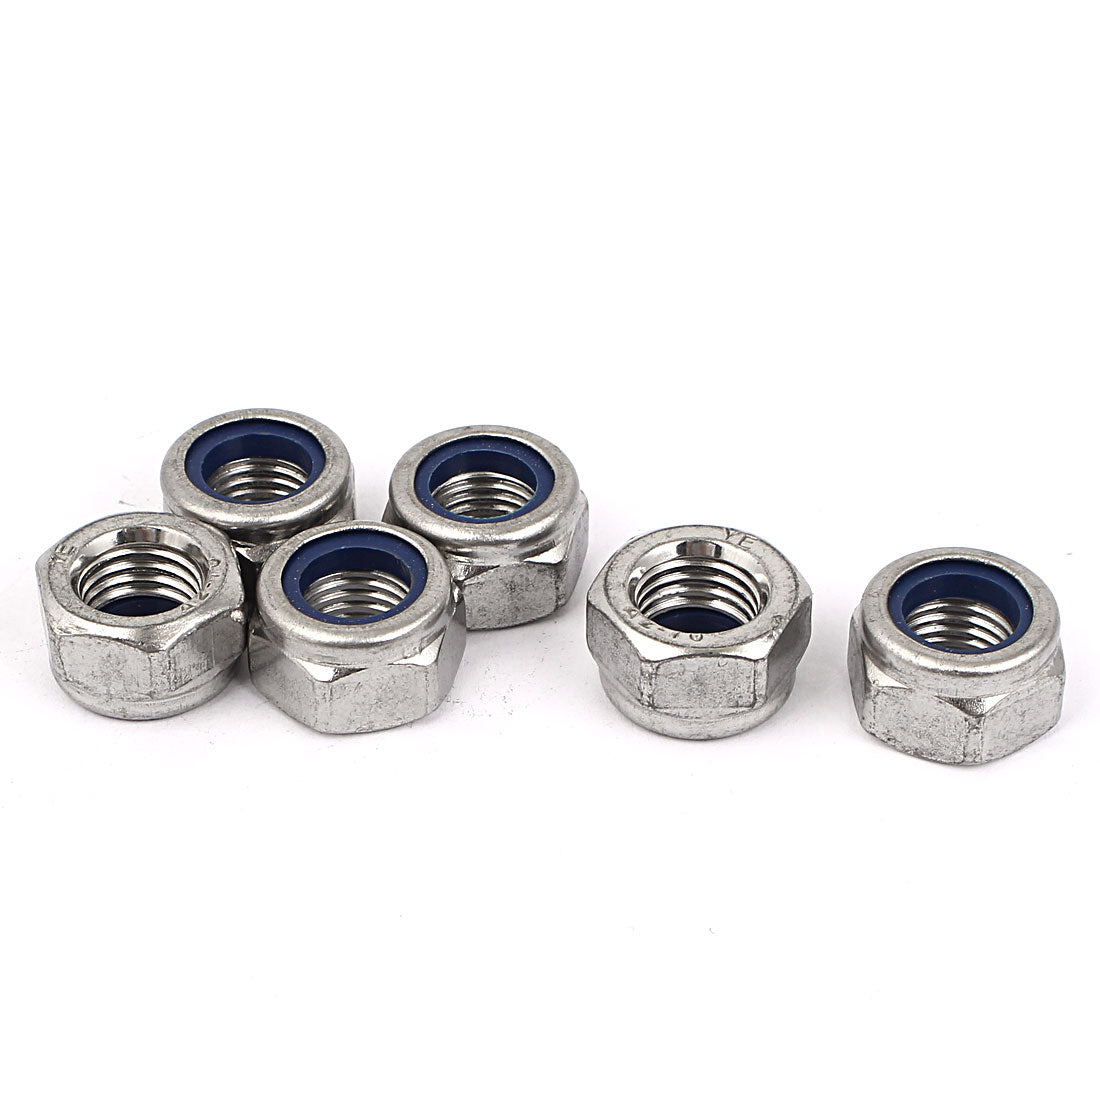 uxcell Uxcell M12x1.5mm 304 Stainless Steel Self-Locking Hex Lock Stop Nut Silver Tone 6pcs